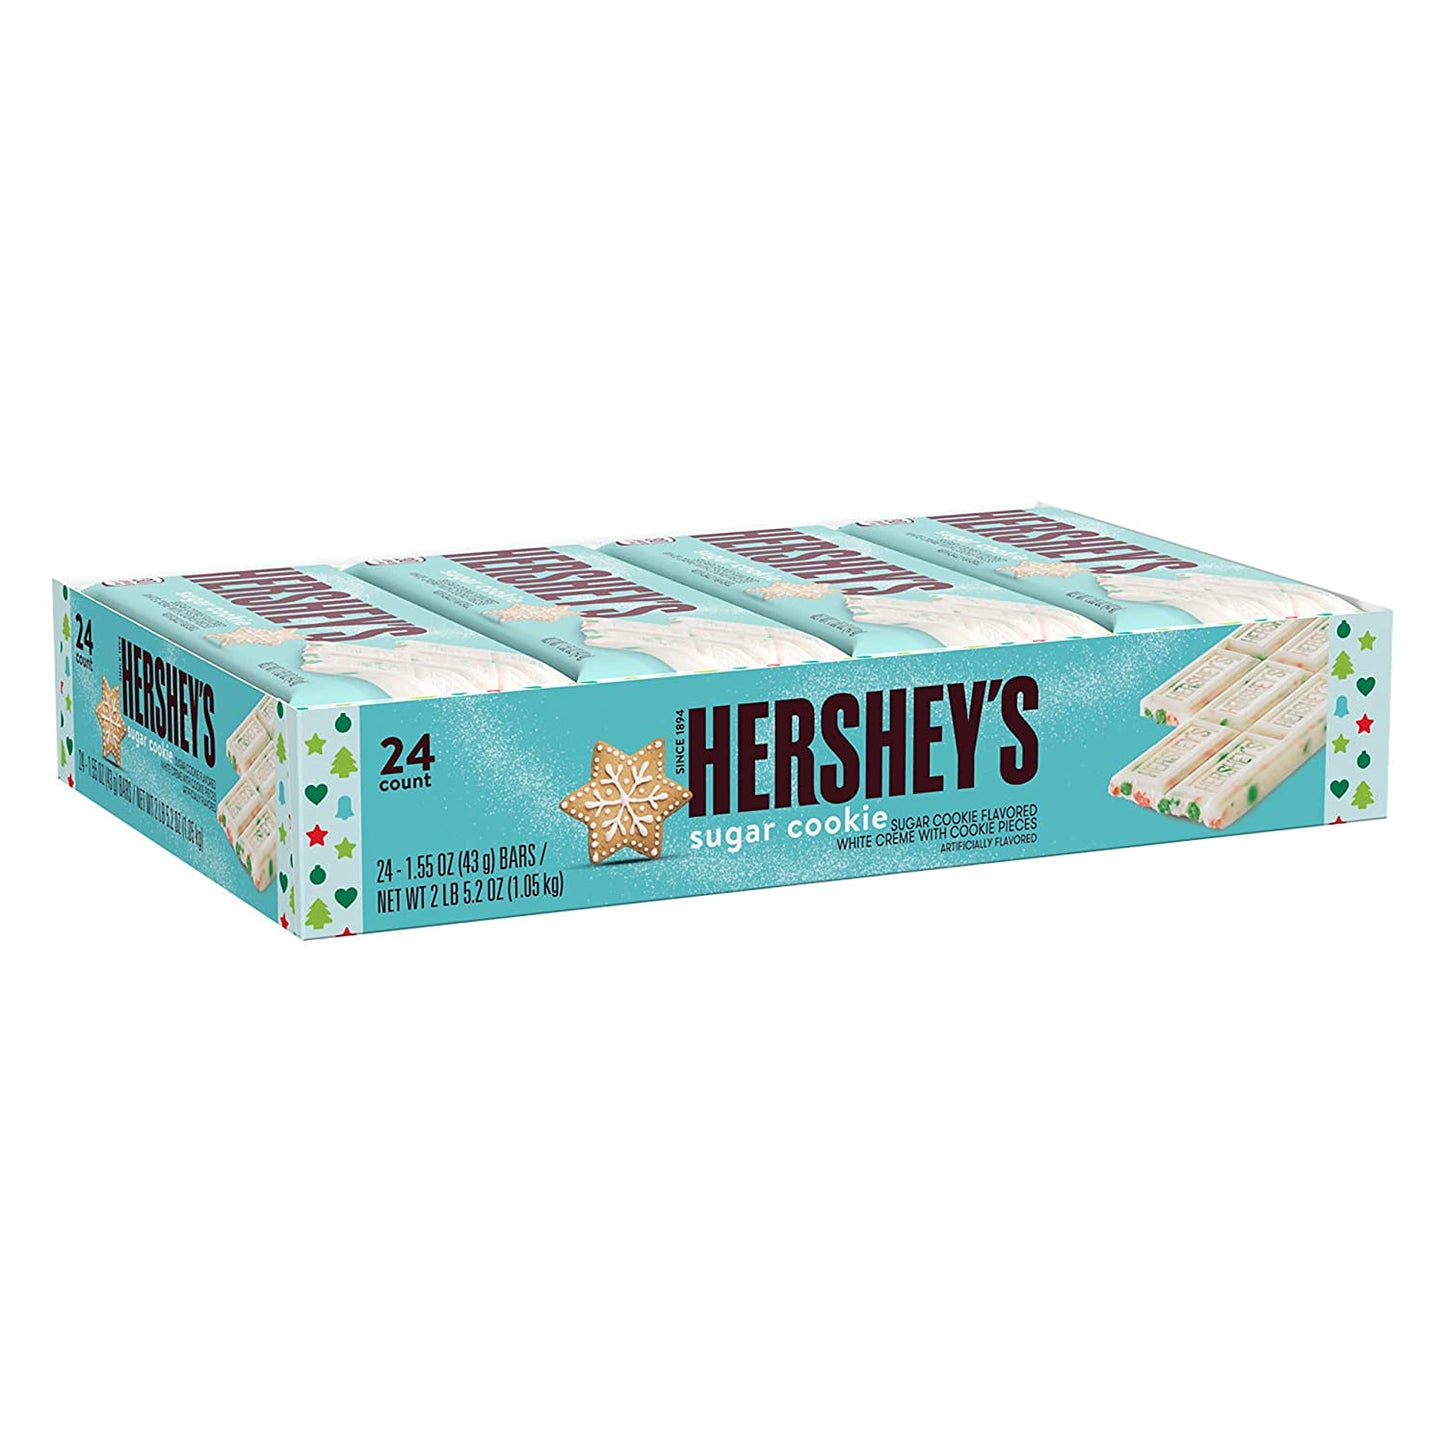 HERSHEY'S Sugar Cookie Flavored White Creme with Cookie Pieces Candy, Bulk Christmas, 1.55 oz Bars (24 Count)